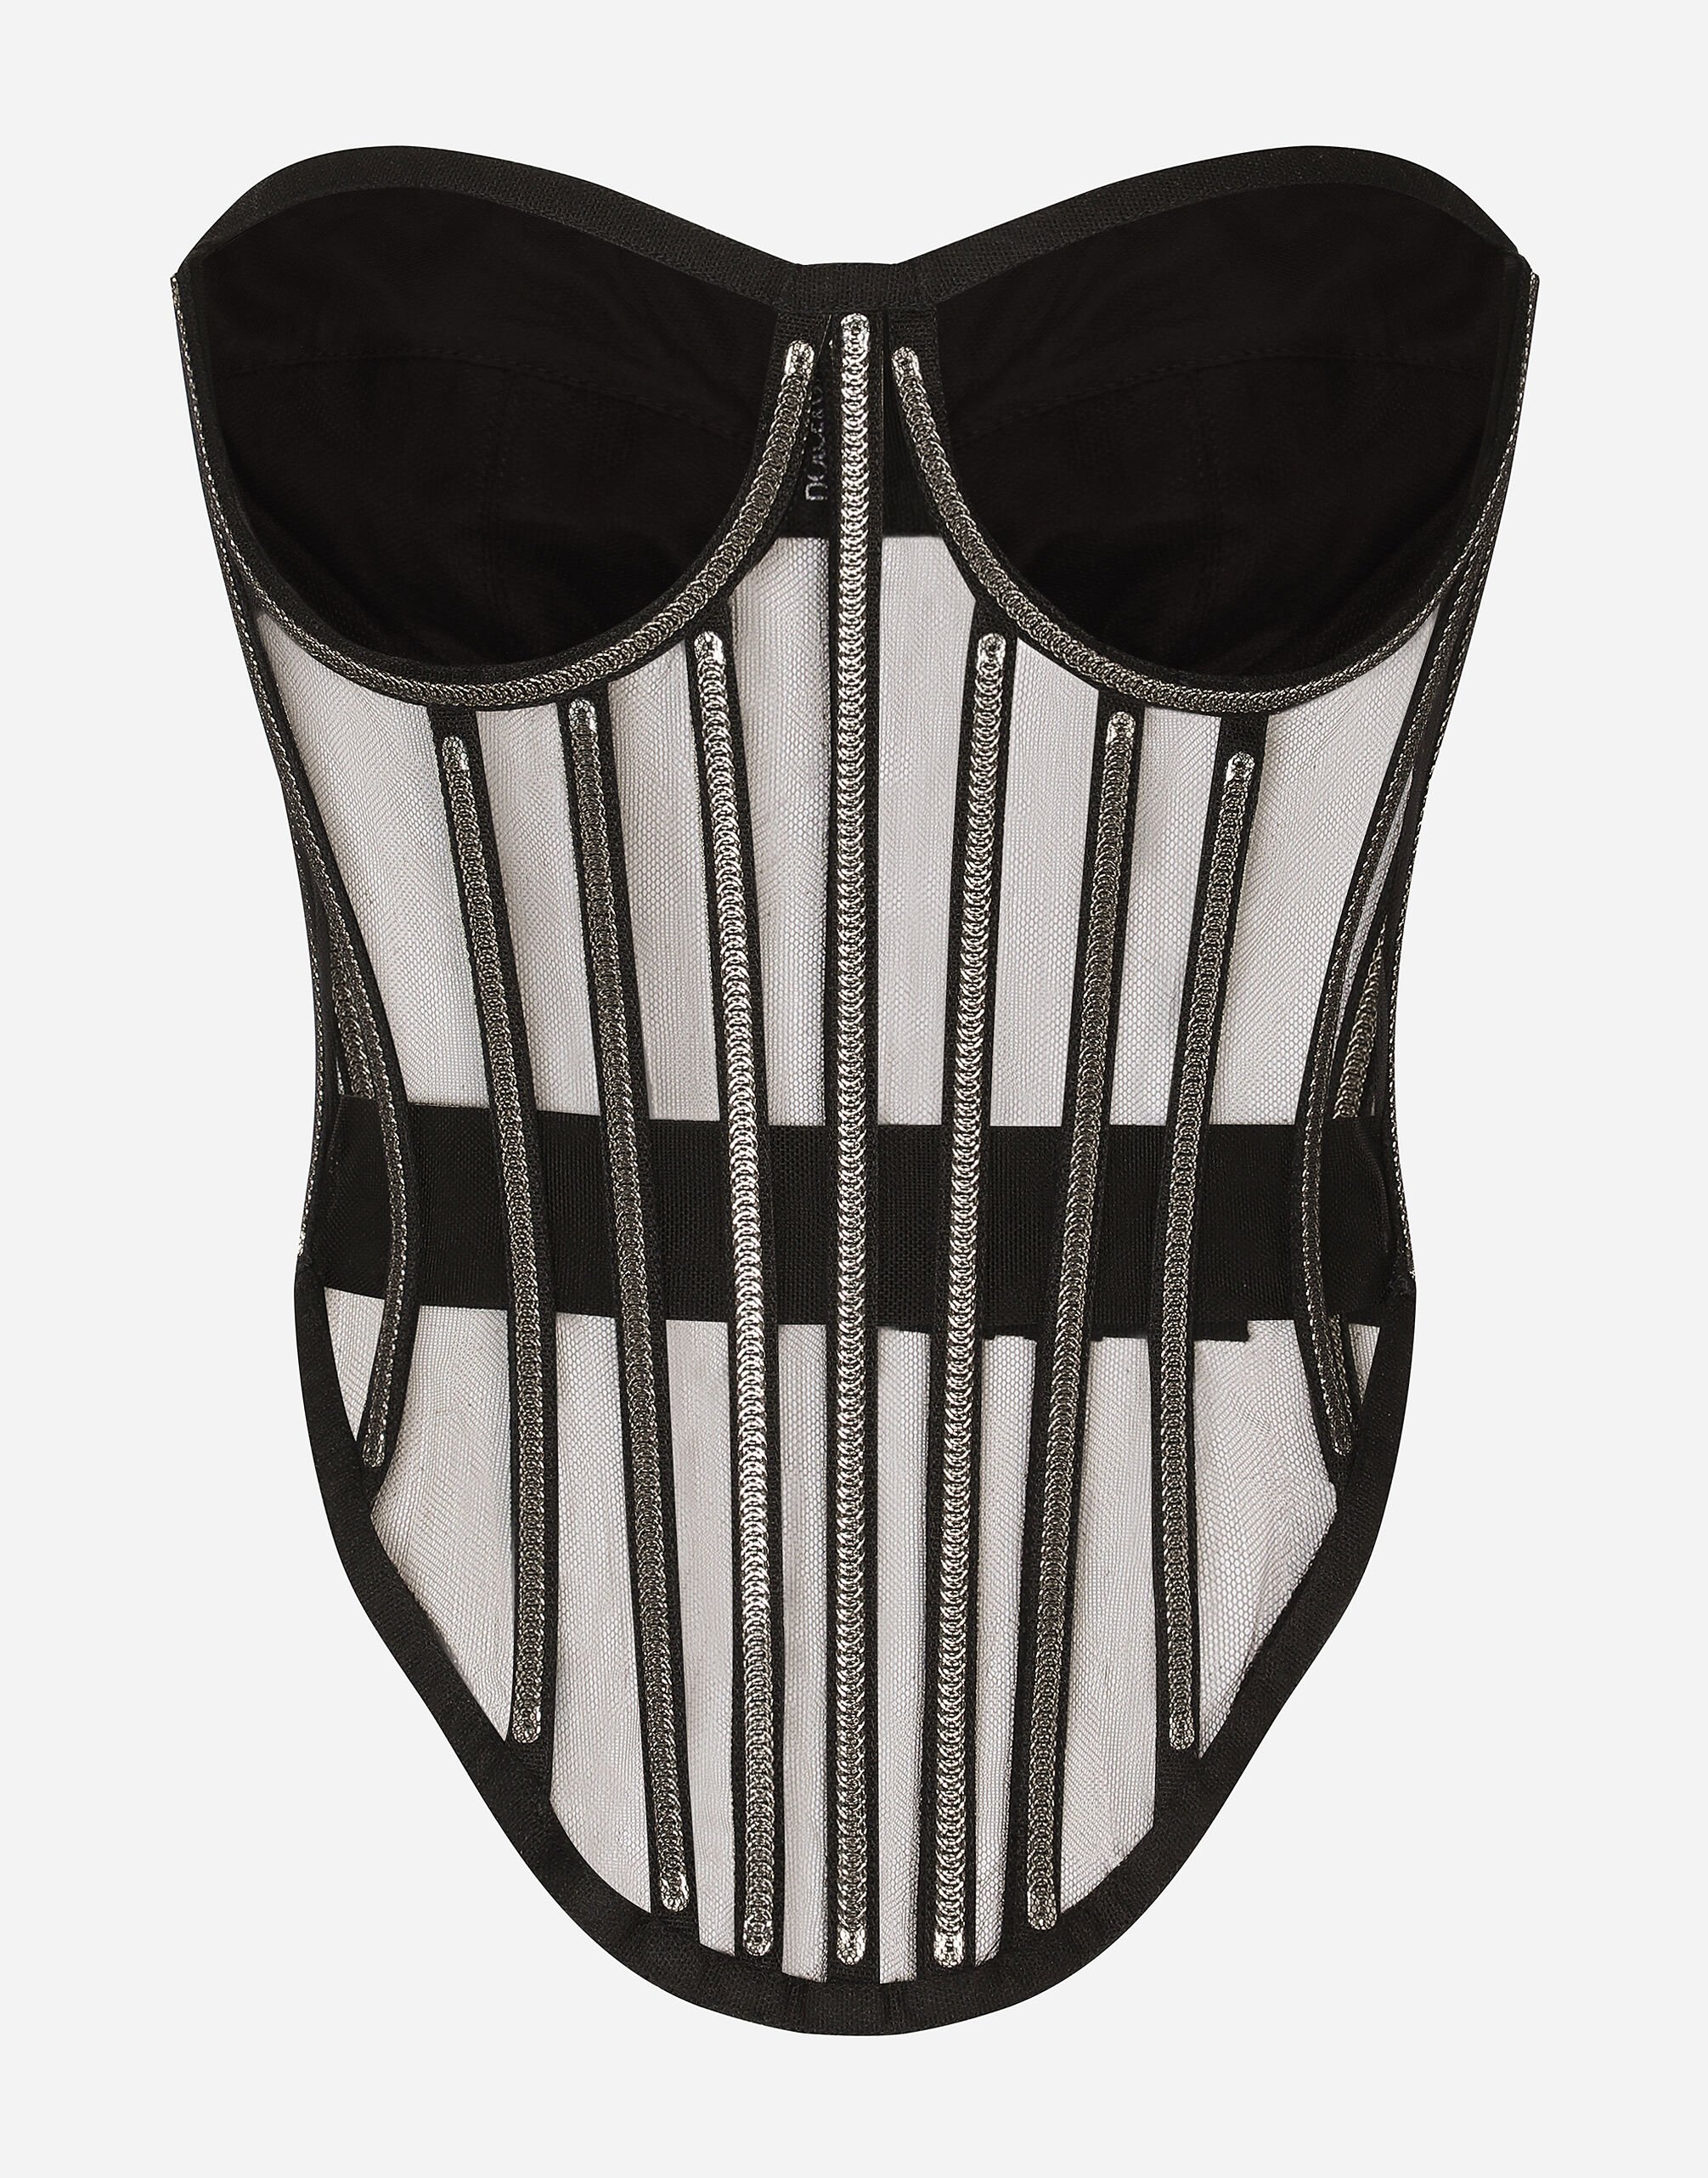 Dolce & Gabbana KIM DOLCE&GABBANA Tulle corset with boning and molded cups Black VG6187VN187